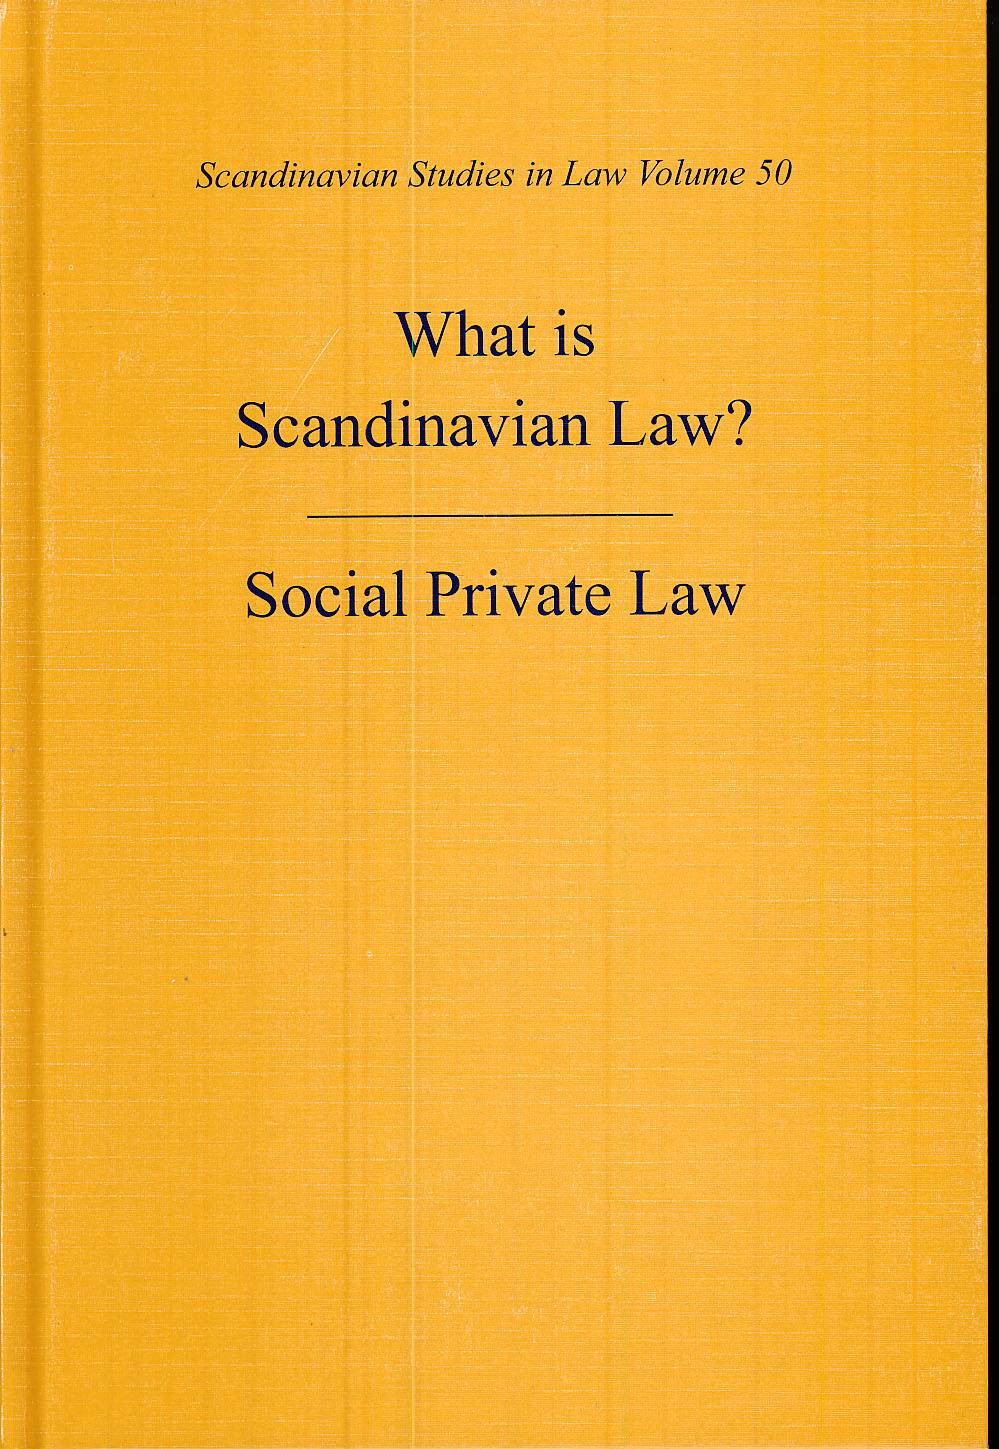 What is Scandinavian Law? Social Private Law